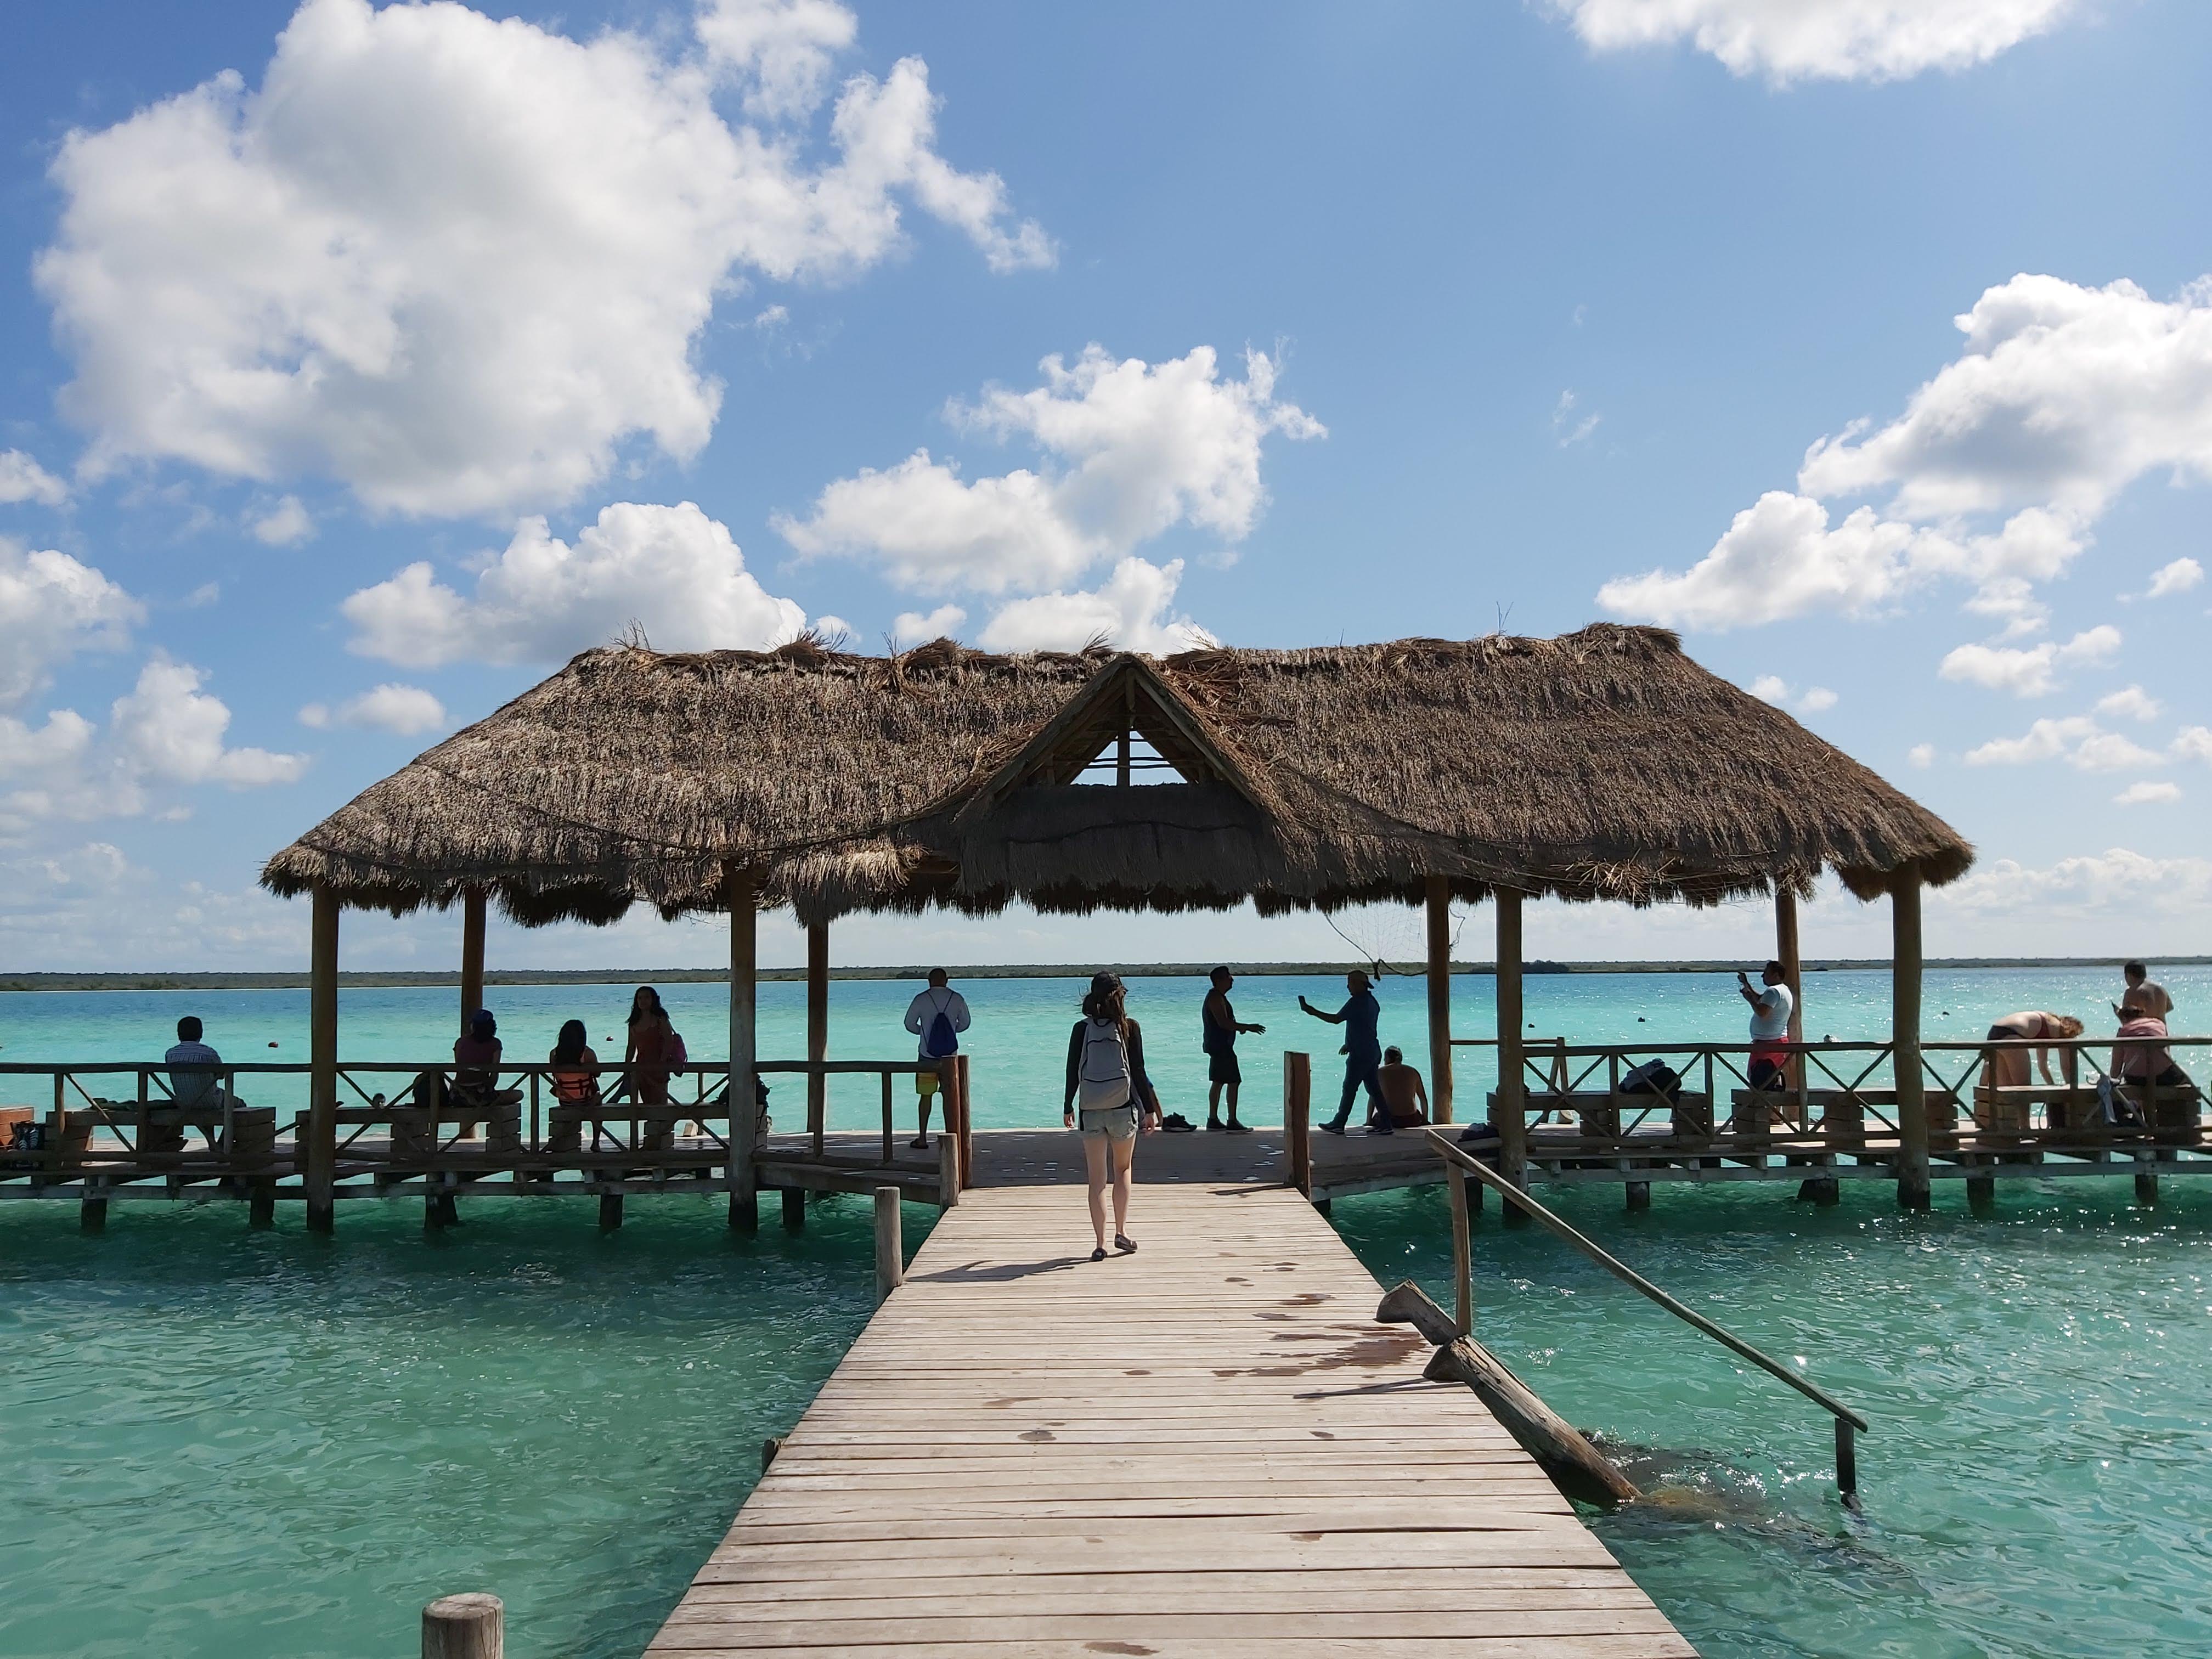 A dock in Lake Bacalar, Mexico